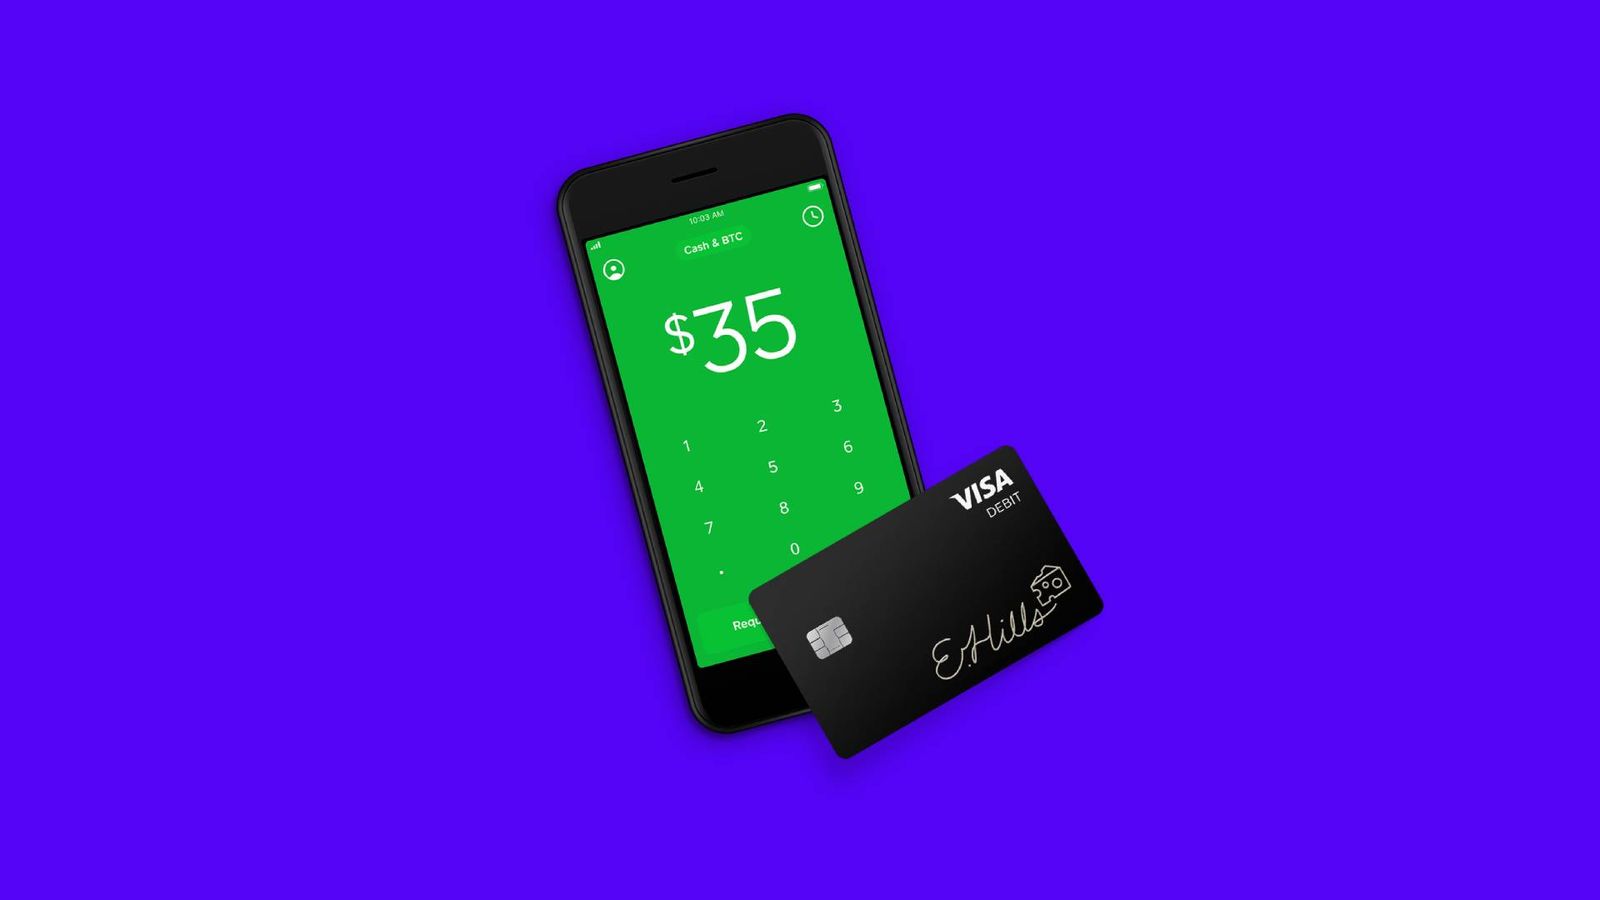 How long does the Cash App card take to arrive? - An image of the Cash App card